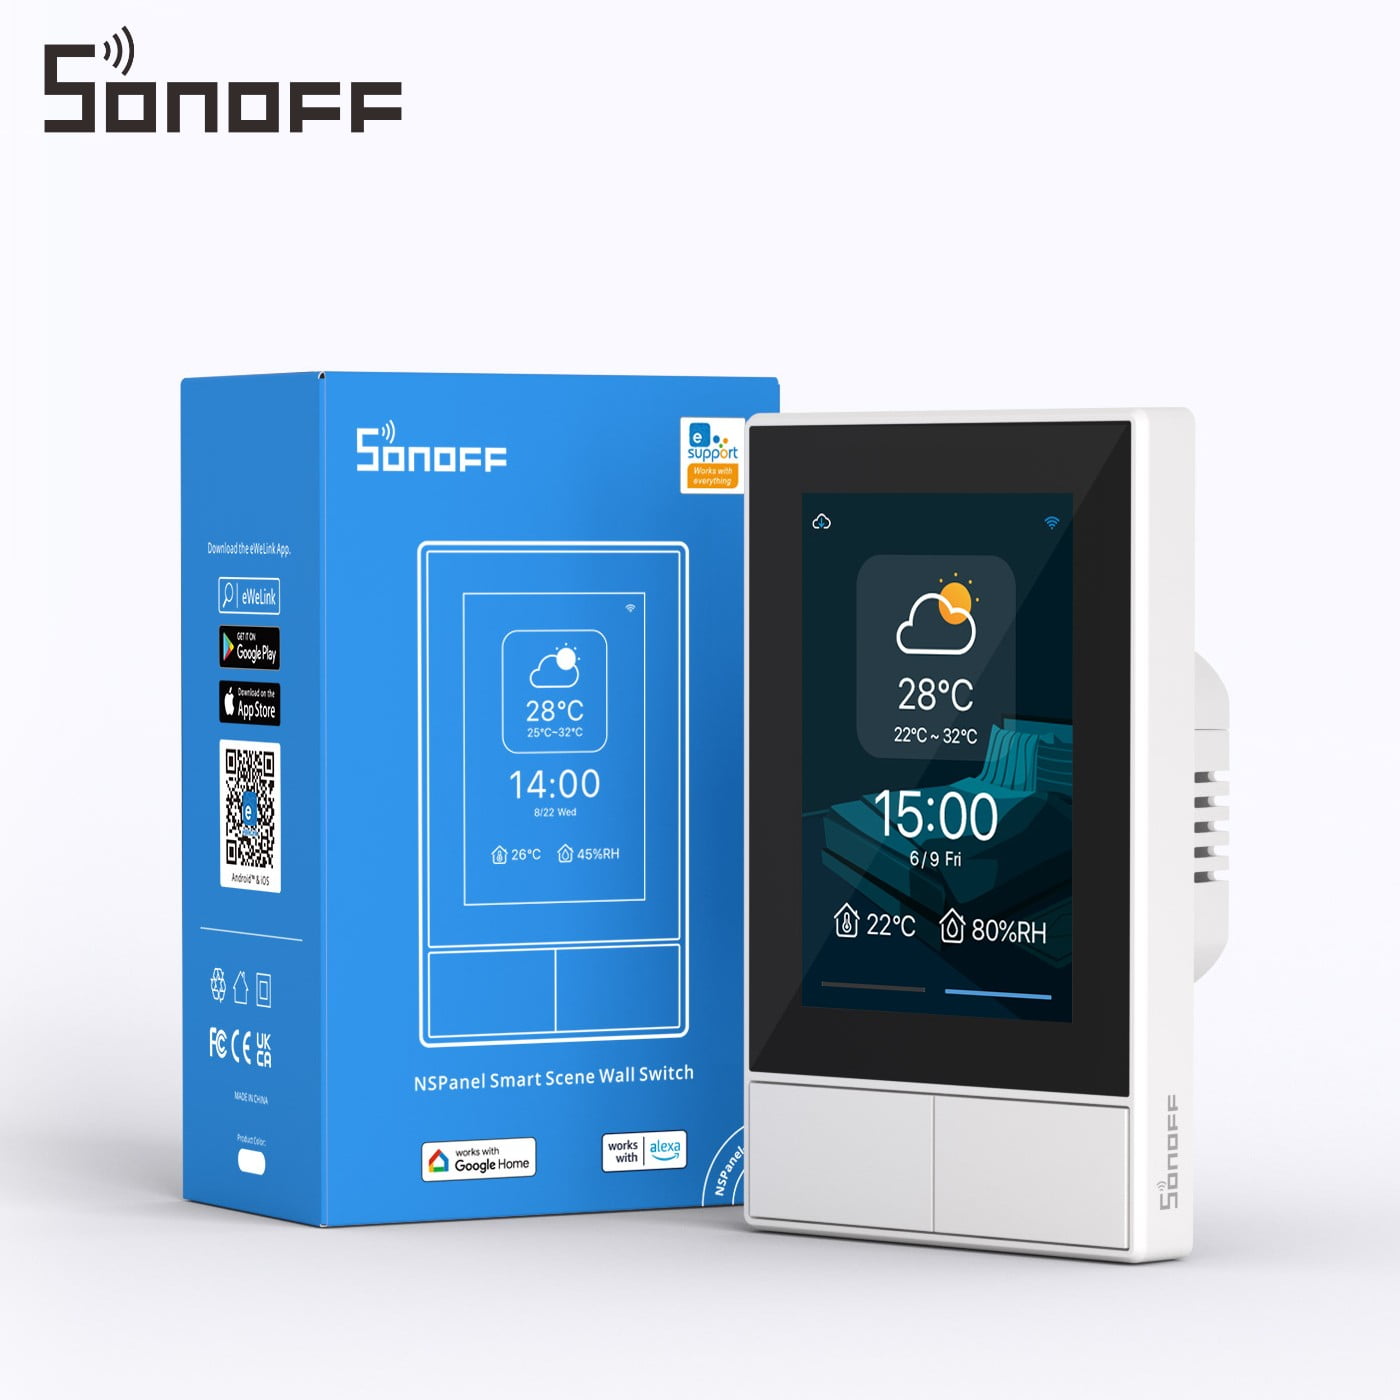 How to Control Your Home on SONOFF NSPanel Smart Scene Wall Switch? - SONOFF  Official